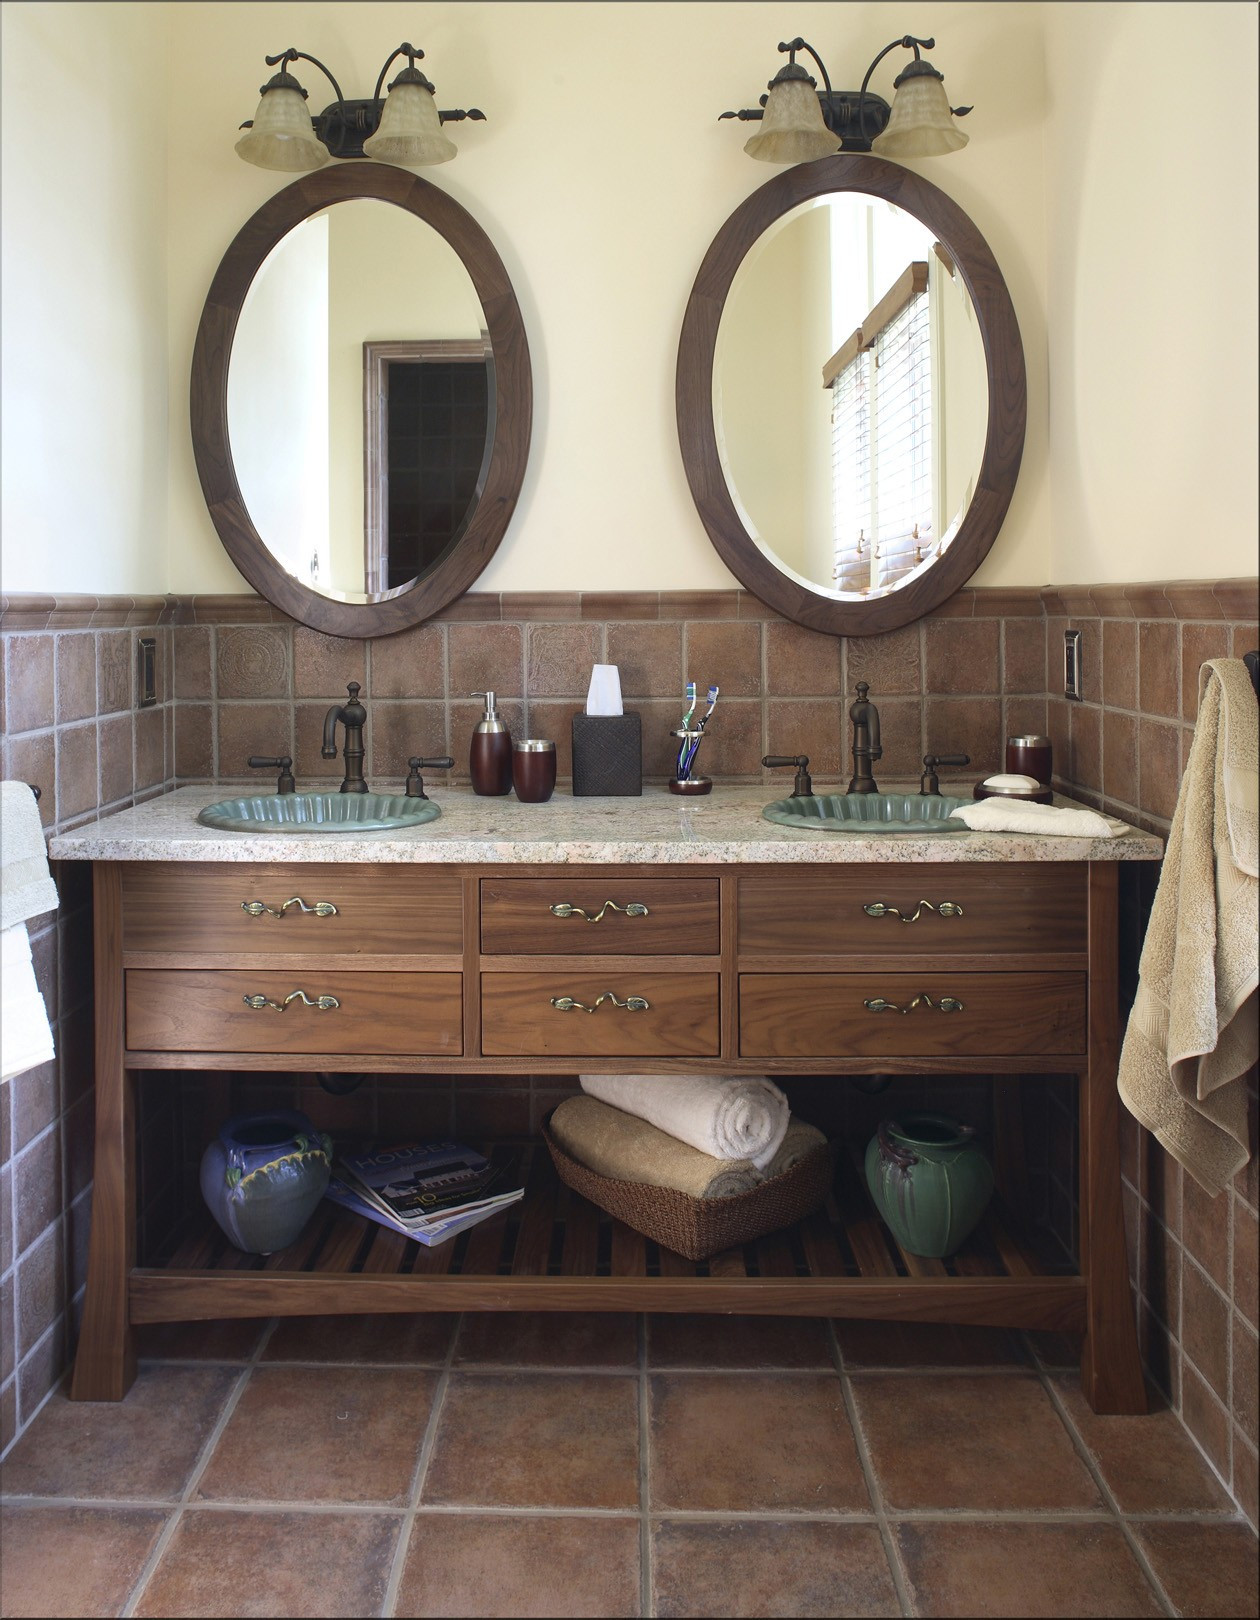 Double Vanity Mirrors For Bathroom
 The Best Wall Mirror Design for Your Bathroom in Elegant